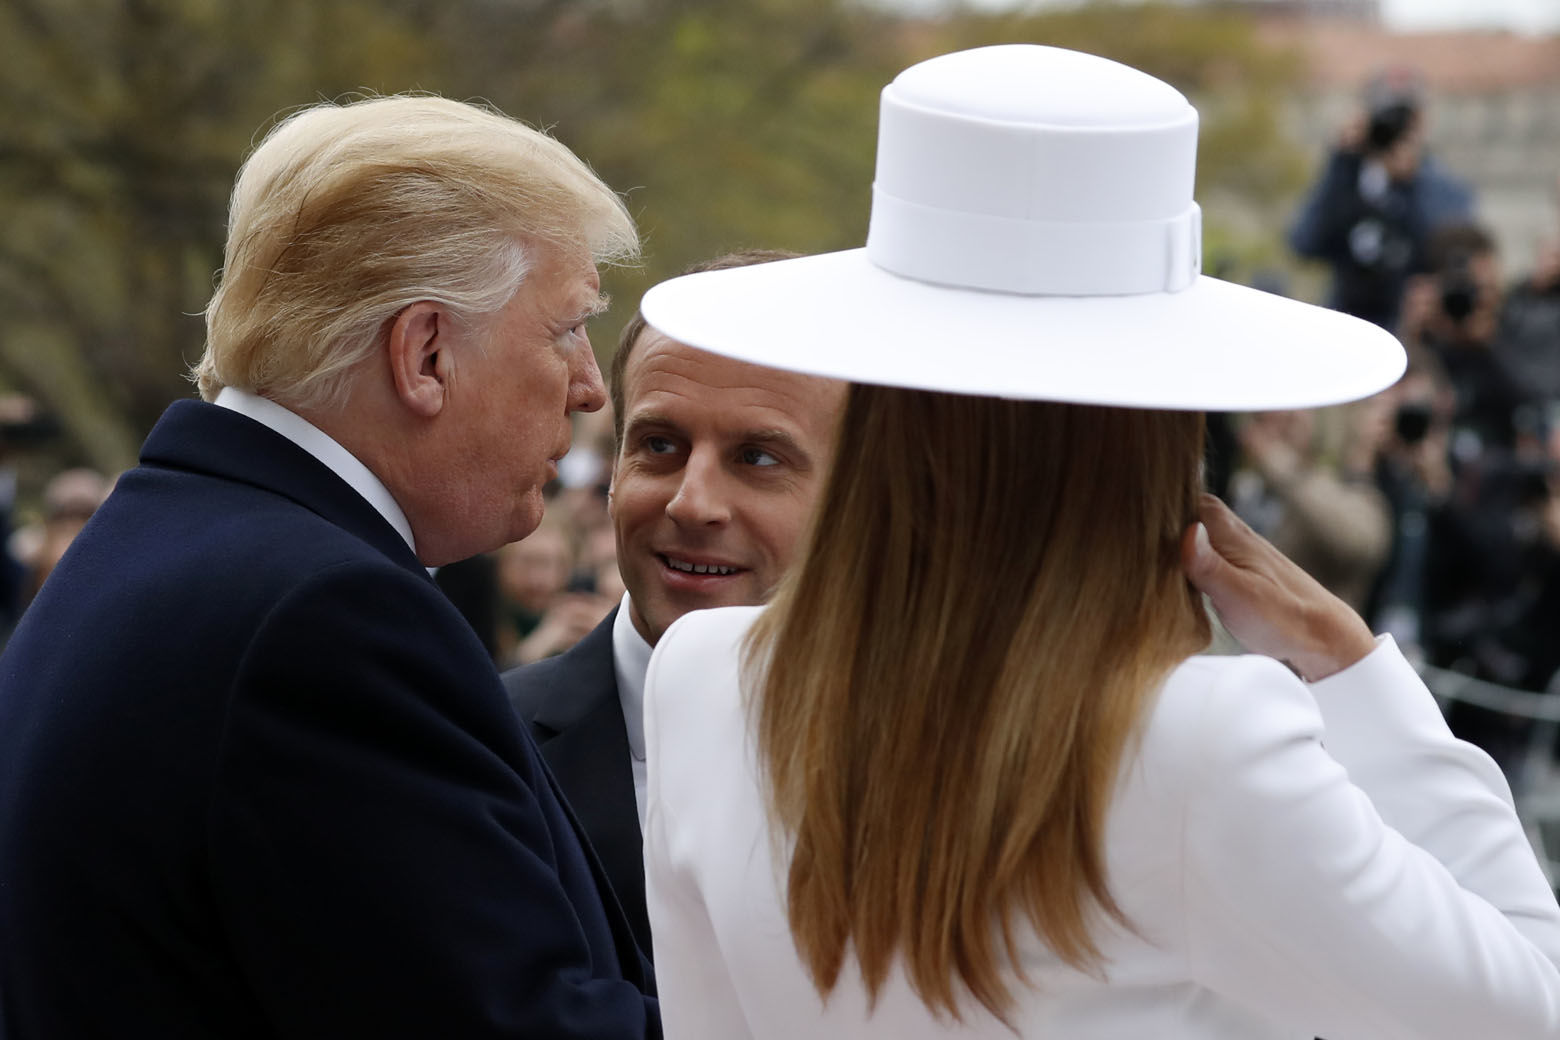 President Donald Trump and first lady Melania Trump greet French President Emmanuel Macron during a State Arrival Ceremony on the South Lawn of the White House in Washington, Tuesday, April 24, 2018. (AP Photo/Pablo Martinez Monsivais)